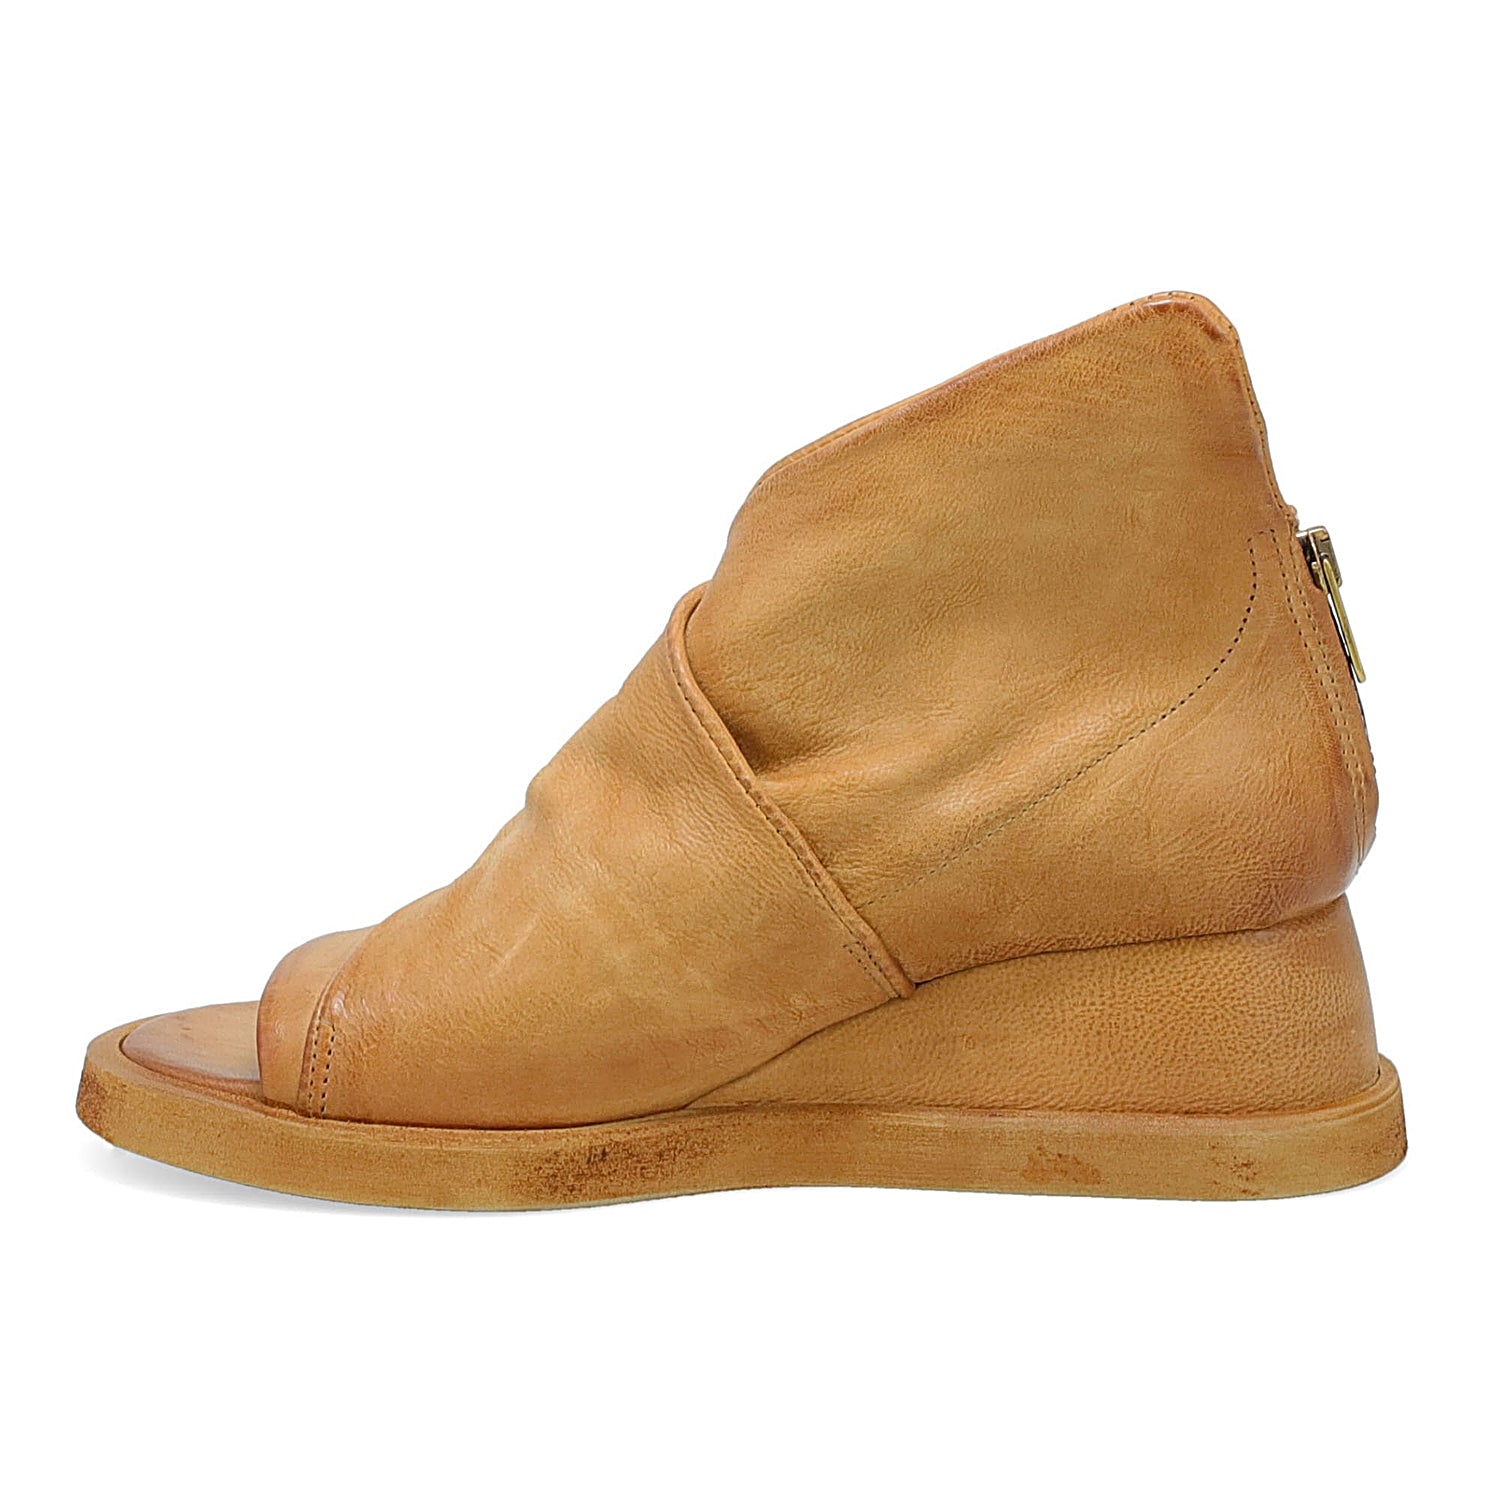 Inner side view of the A.S.98 Craig wedge in Camel.